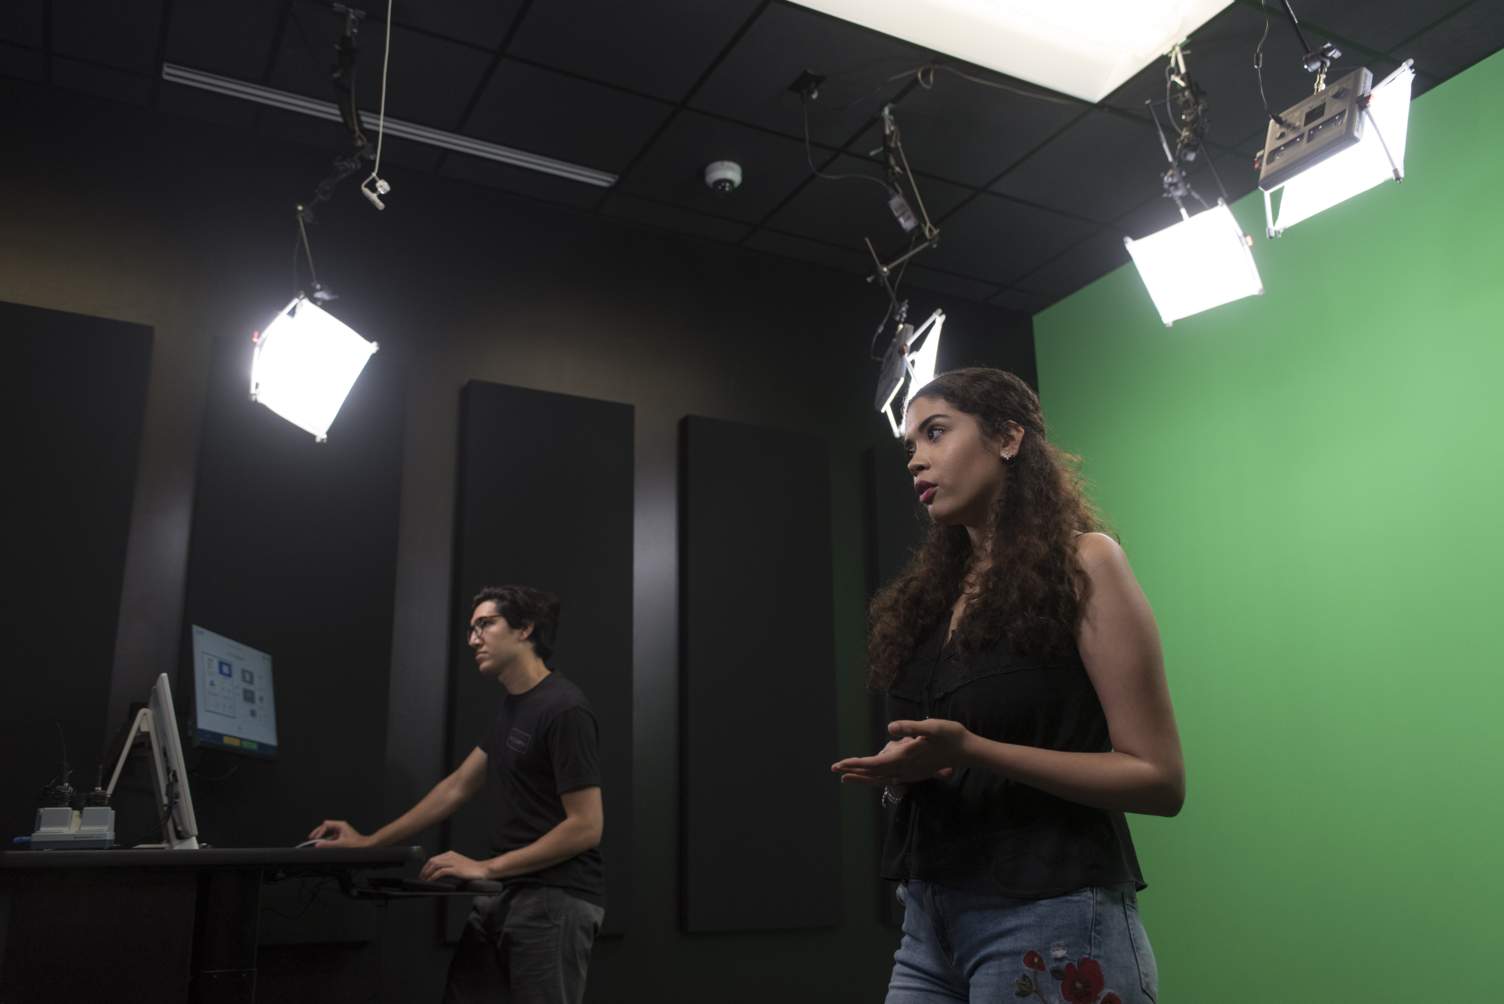 Woman in studio lighting and green screen background and man operating computer